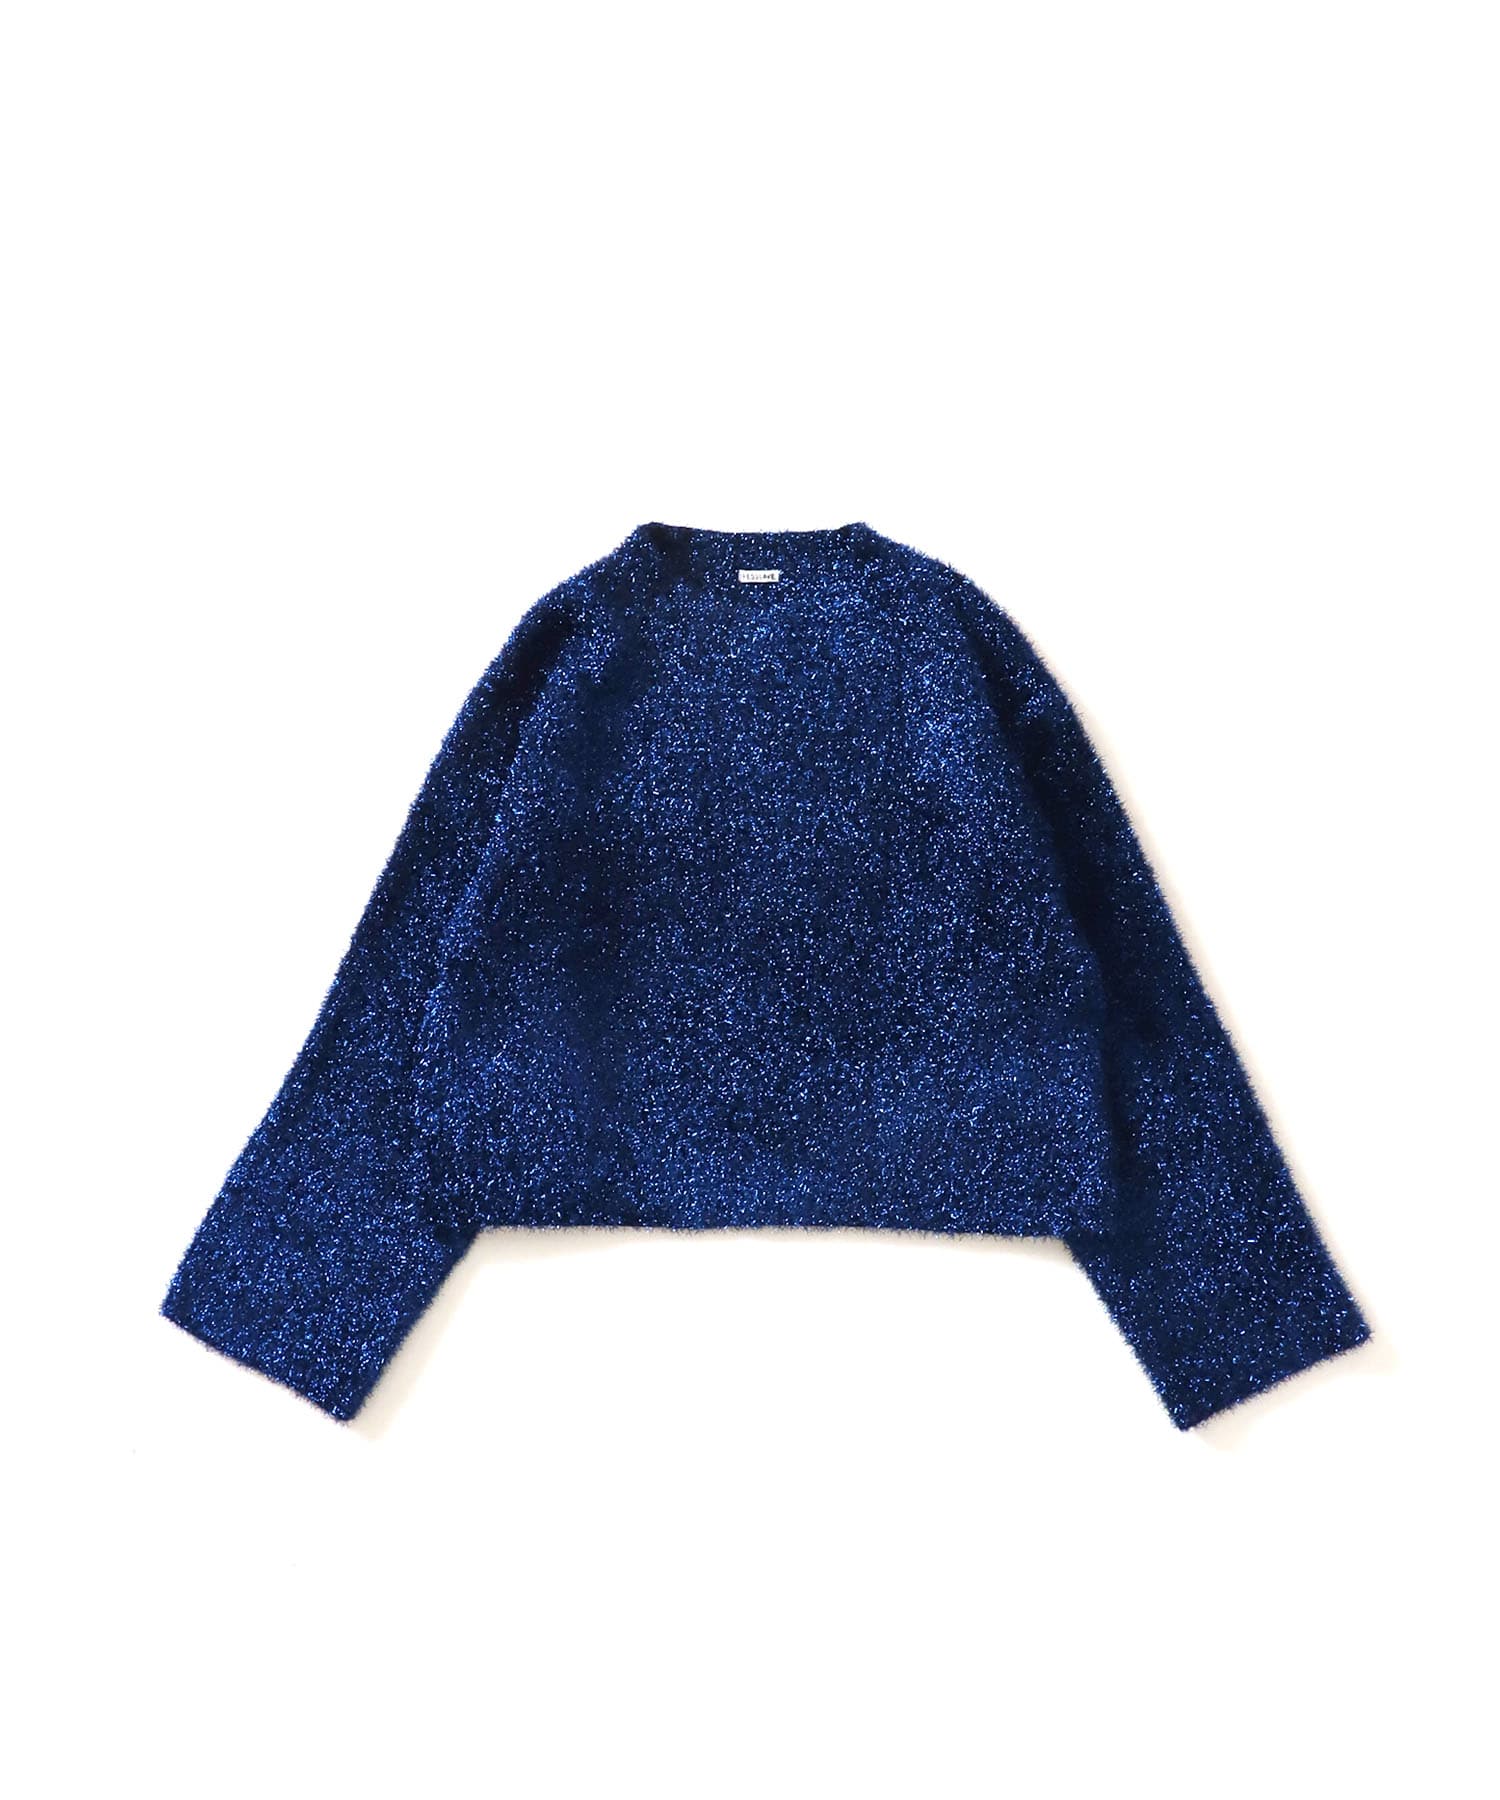 glass yarn crew neck pullover | AND ON JIONE STORE（アンドオン